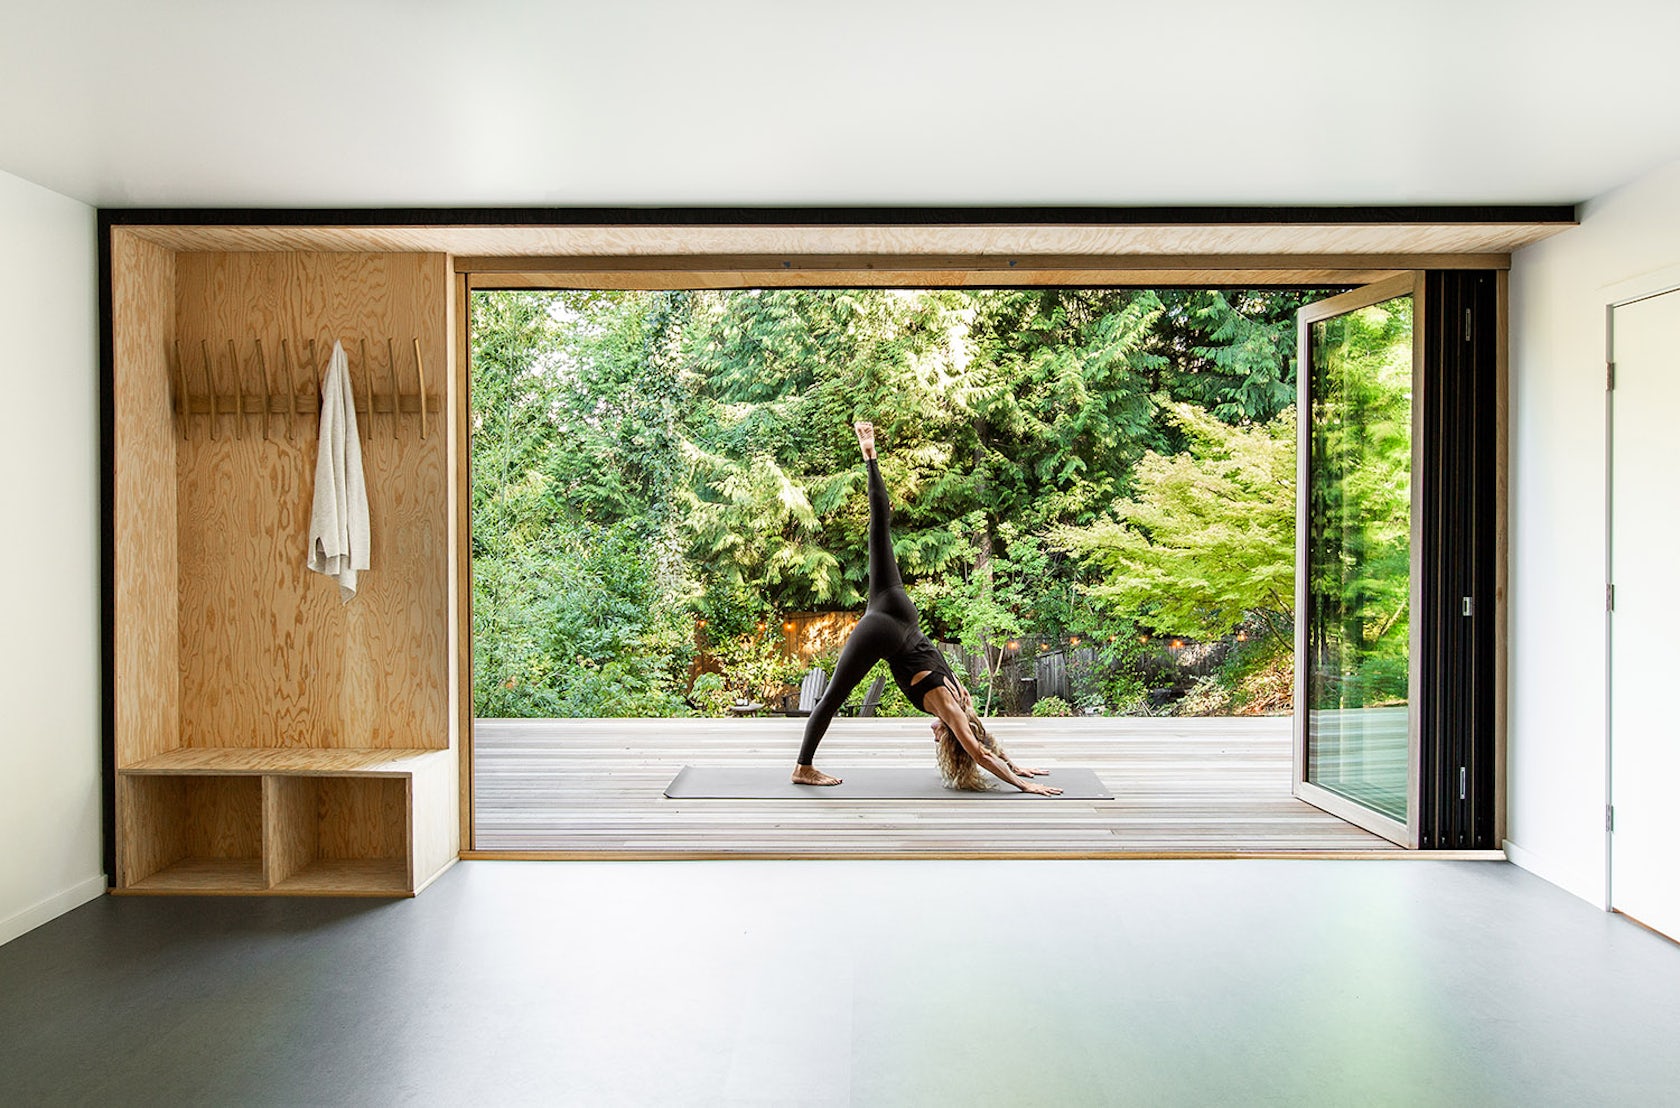 House with a Yoga Studio by Robert Hutchison Architecture